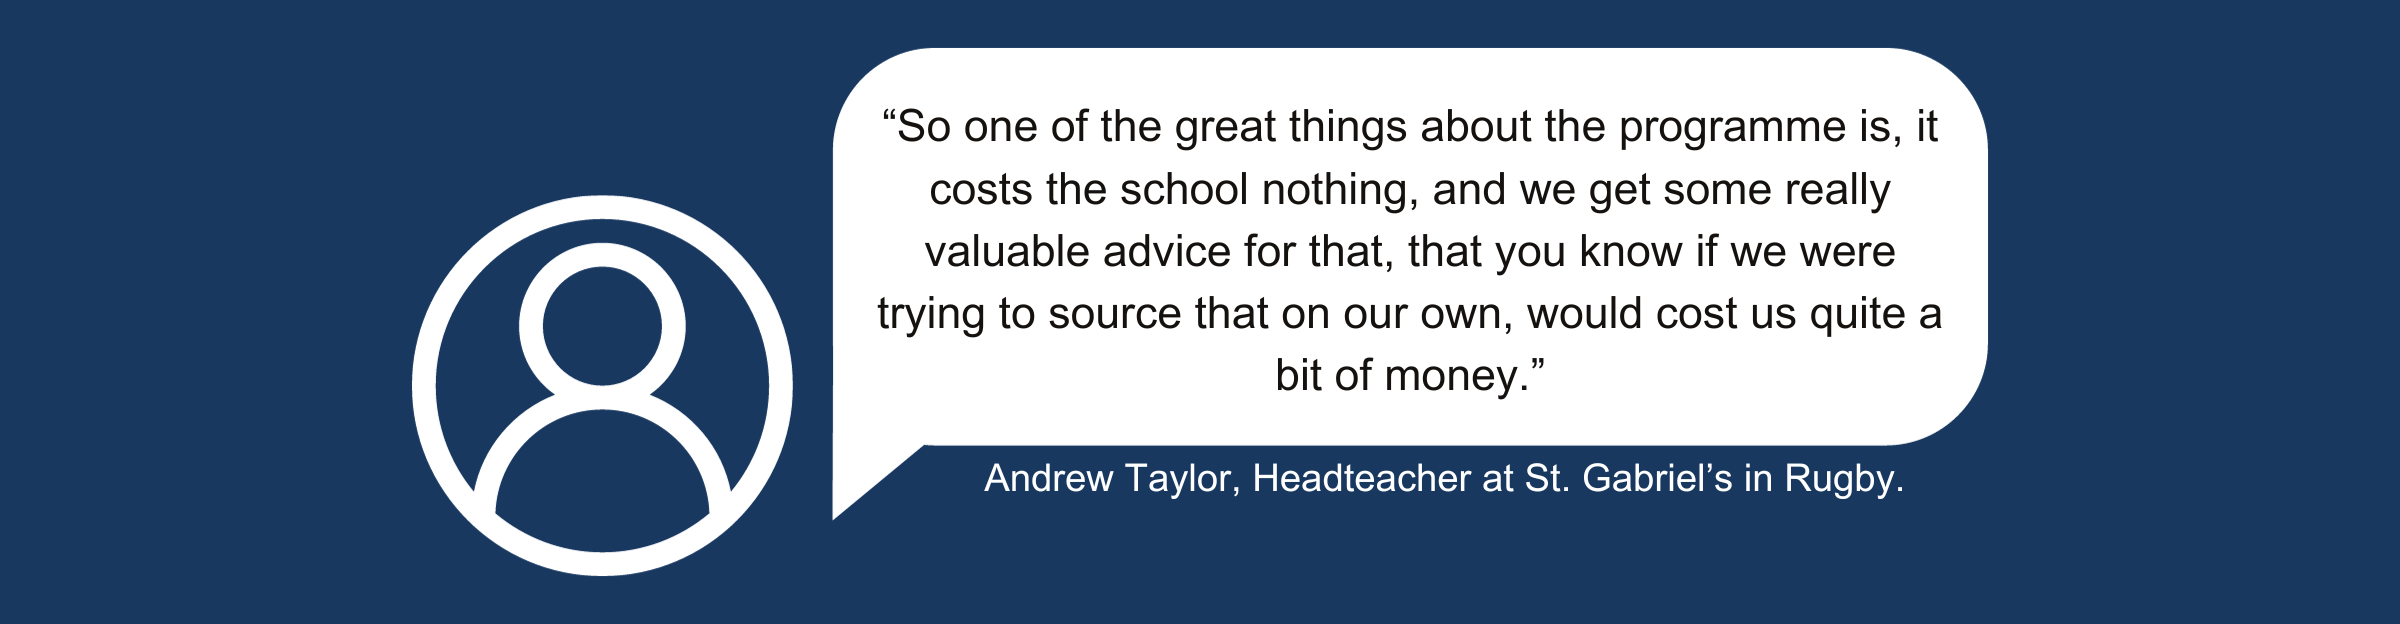 A quote from Andrew Taylor, Headteacher at St Gabriel’s in Rugby which reads “So one of the great things about the programme is, it costs the school nothing, and we get some really valuable advice for that, that you know if we were trying to source that on our own, would cost us quite a bit of money.” 